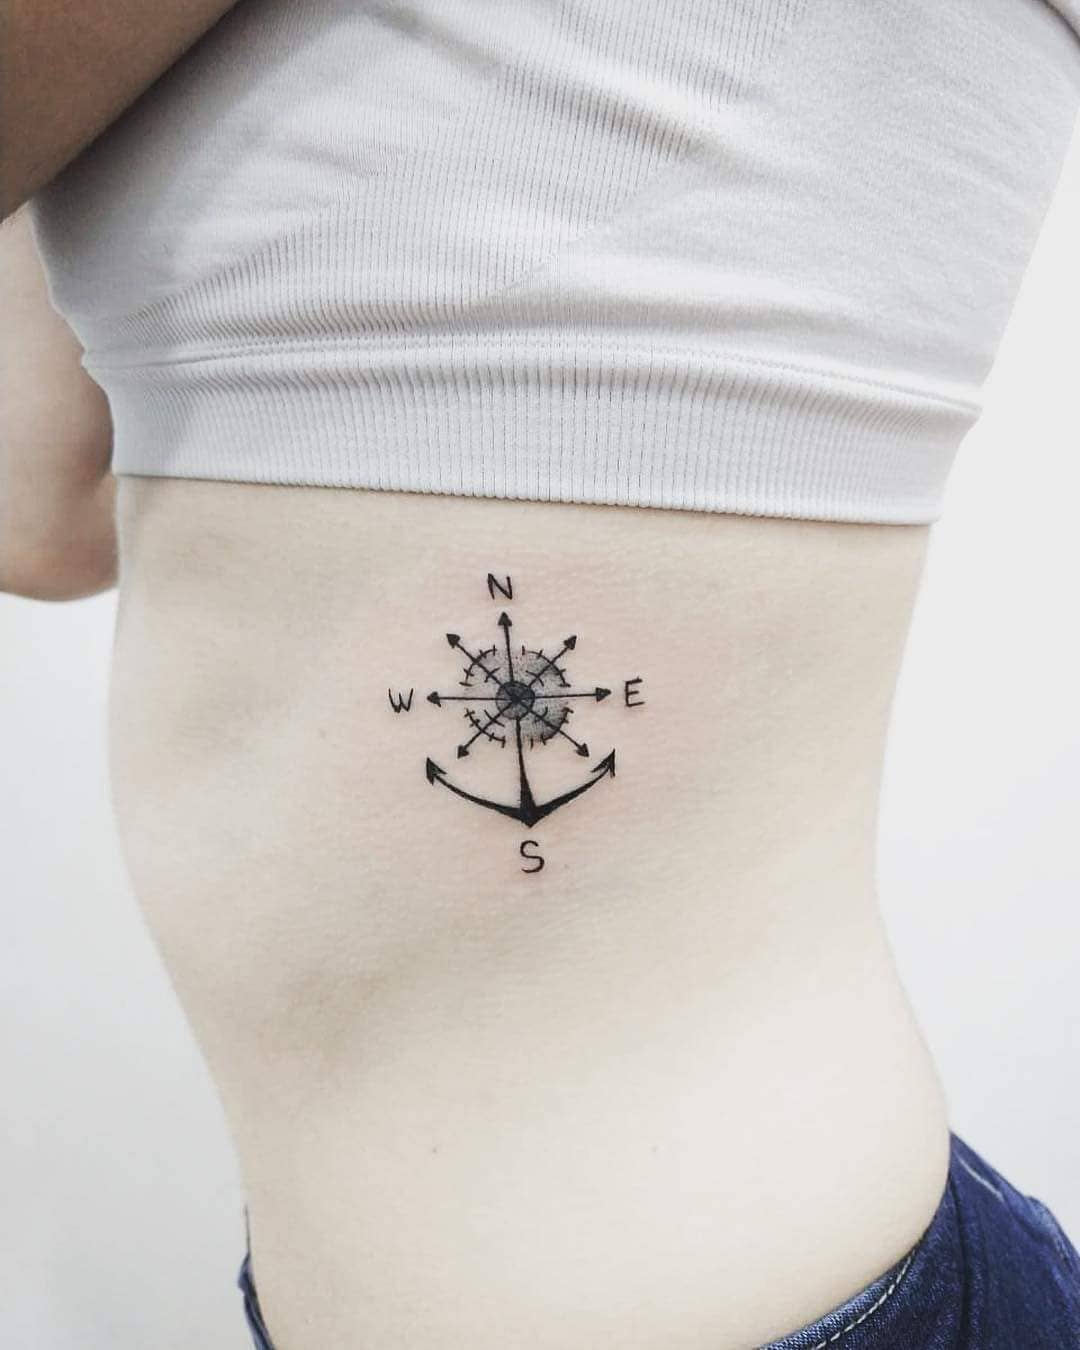 Marvelous ankle tattoo with compass on ribs